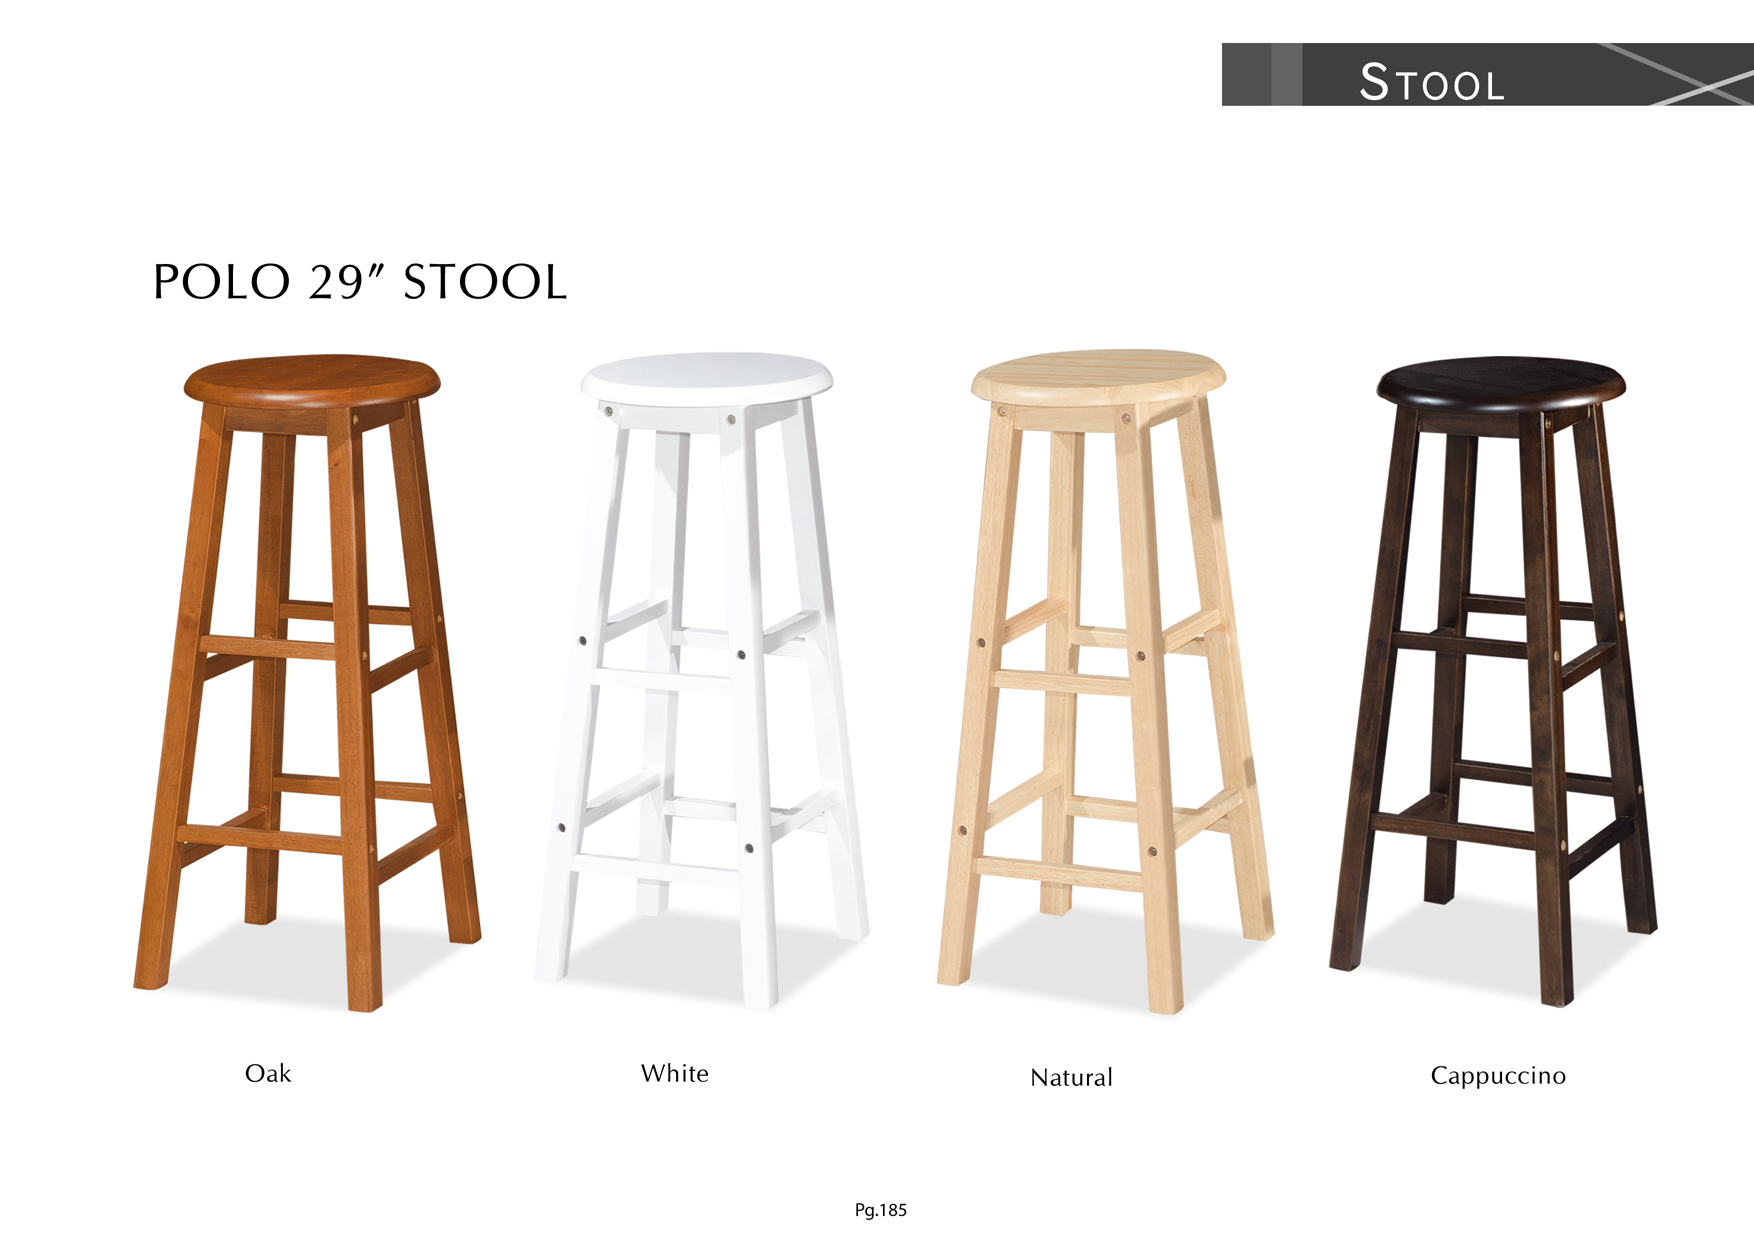 Product: PG185. POLO 29 STOOL